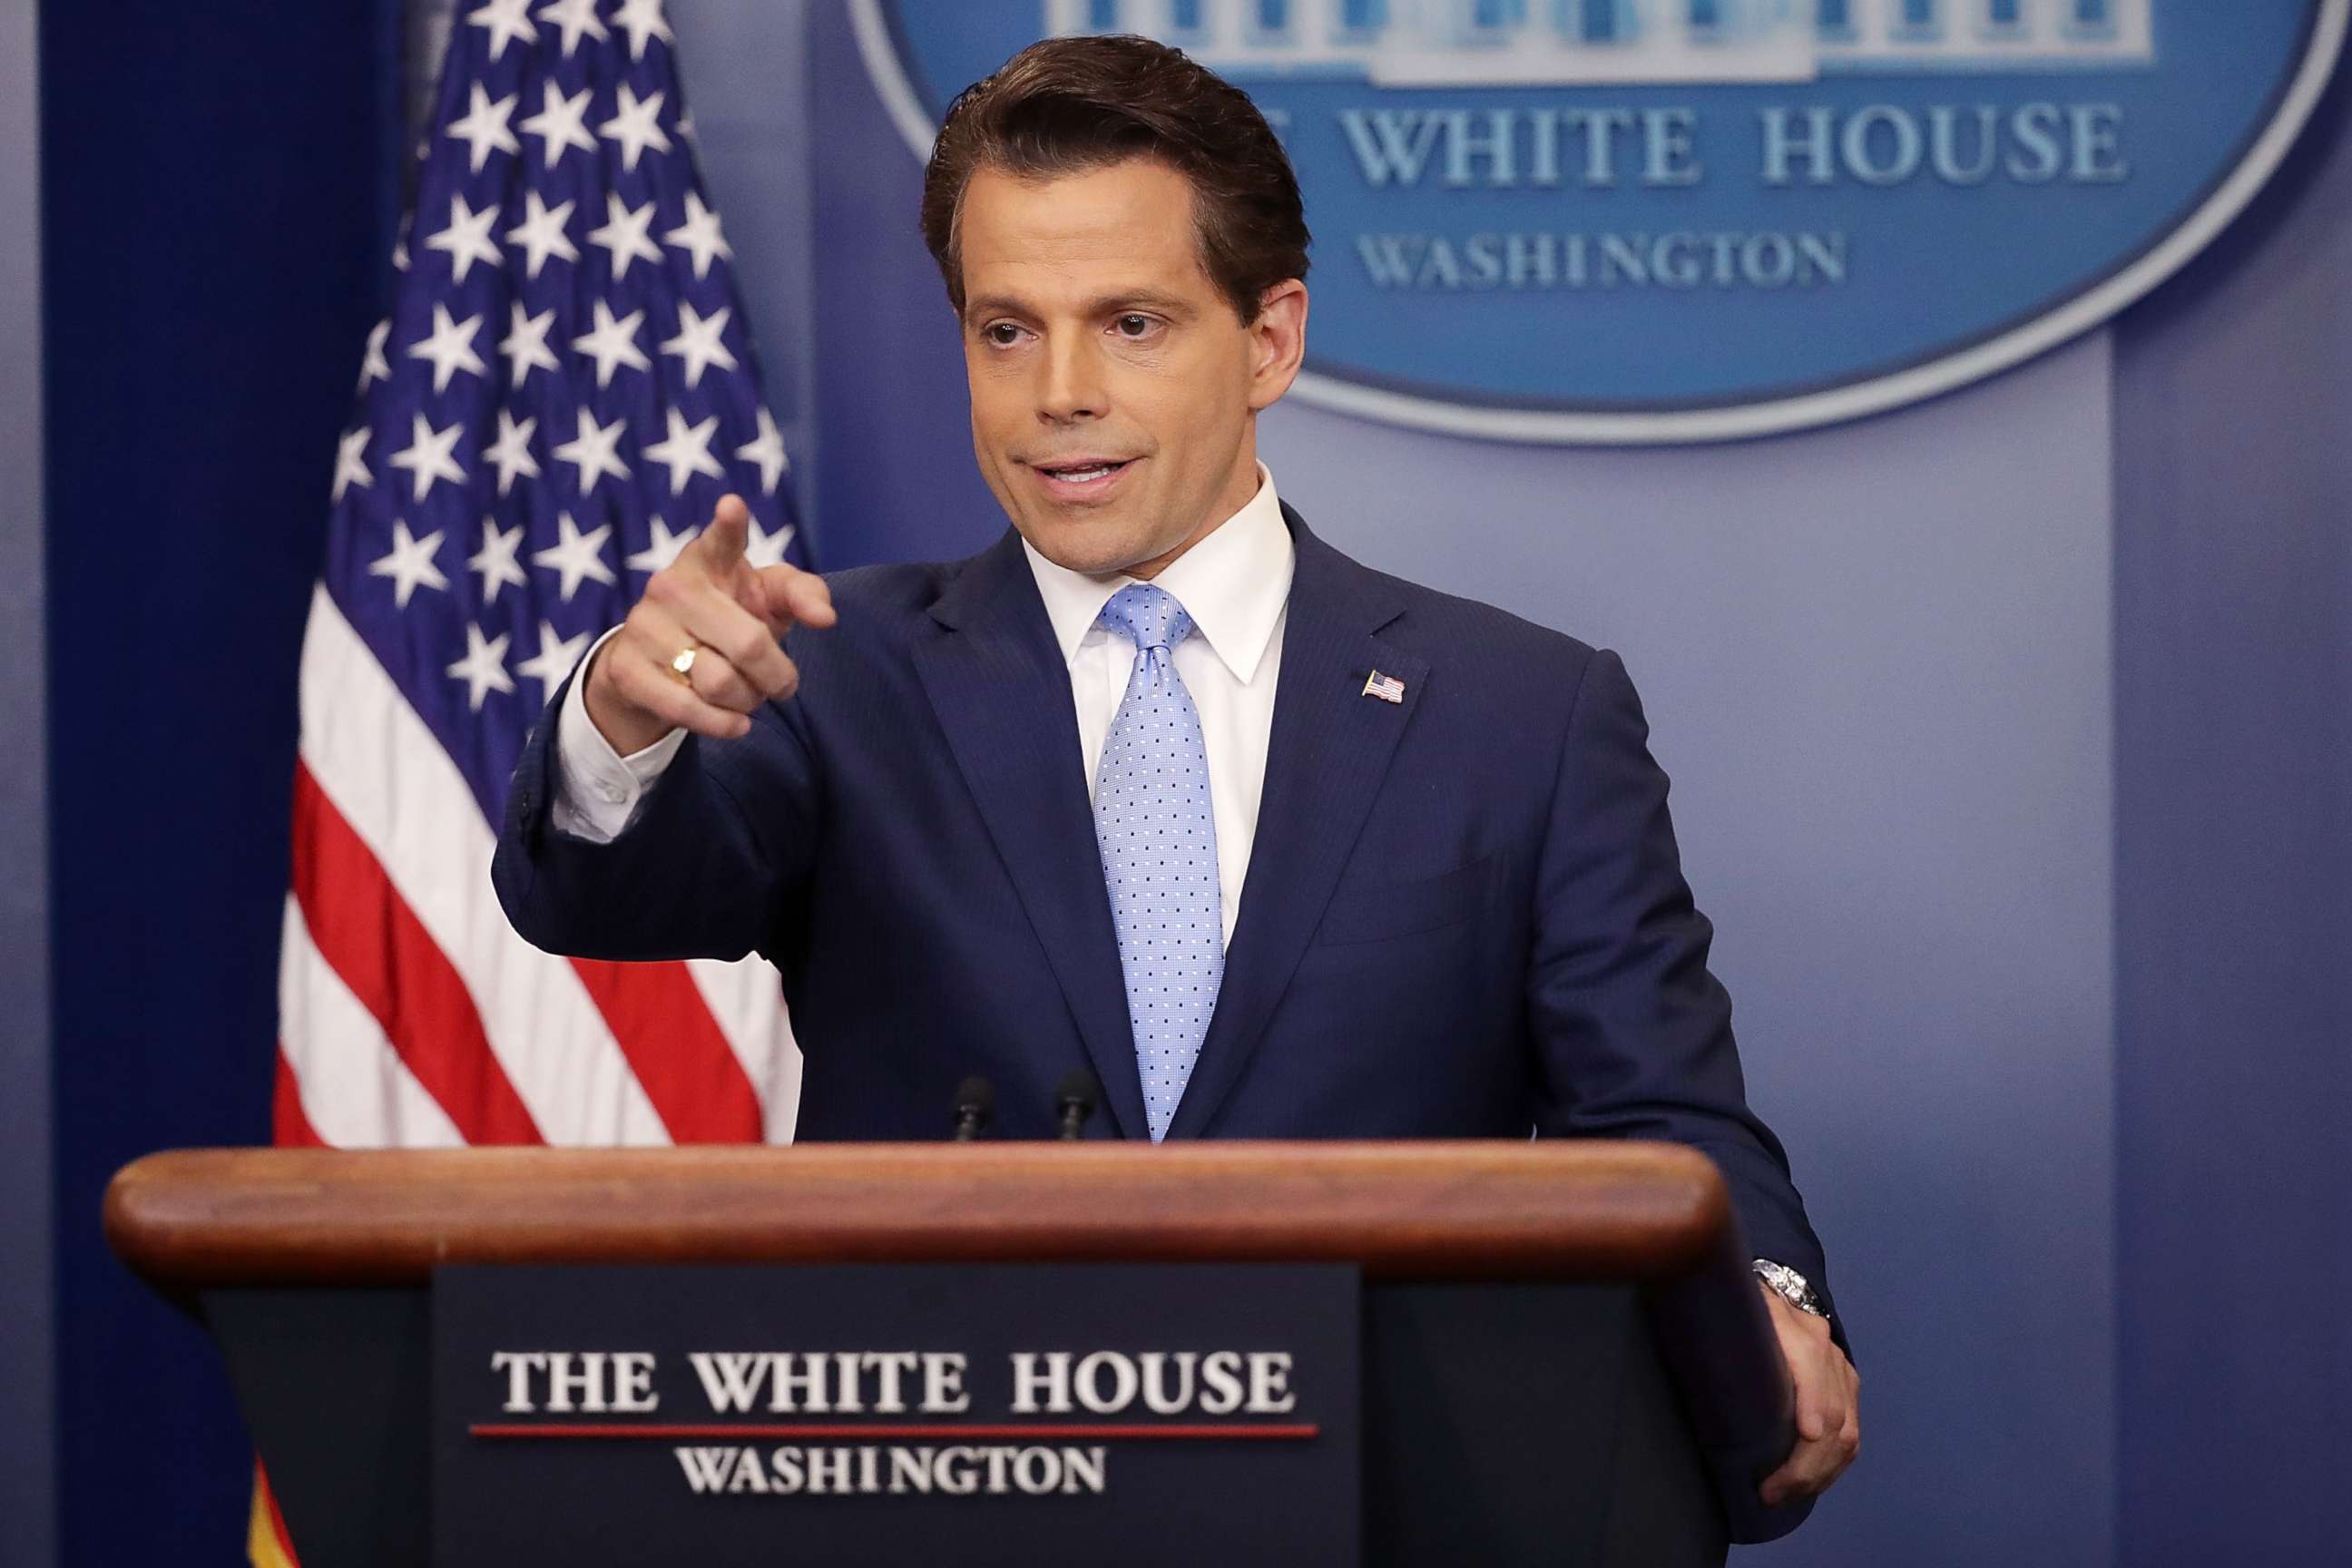 PHOTO: Anthony Scaramucci answers questions during the daily White House press briefing, July 21, 2017 in Washington, D.C.